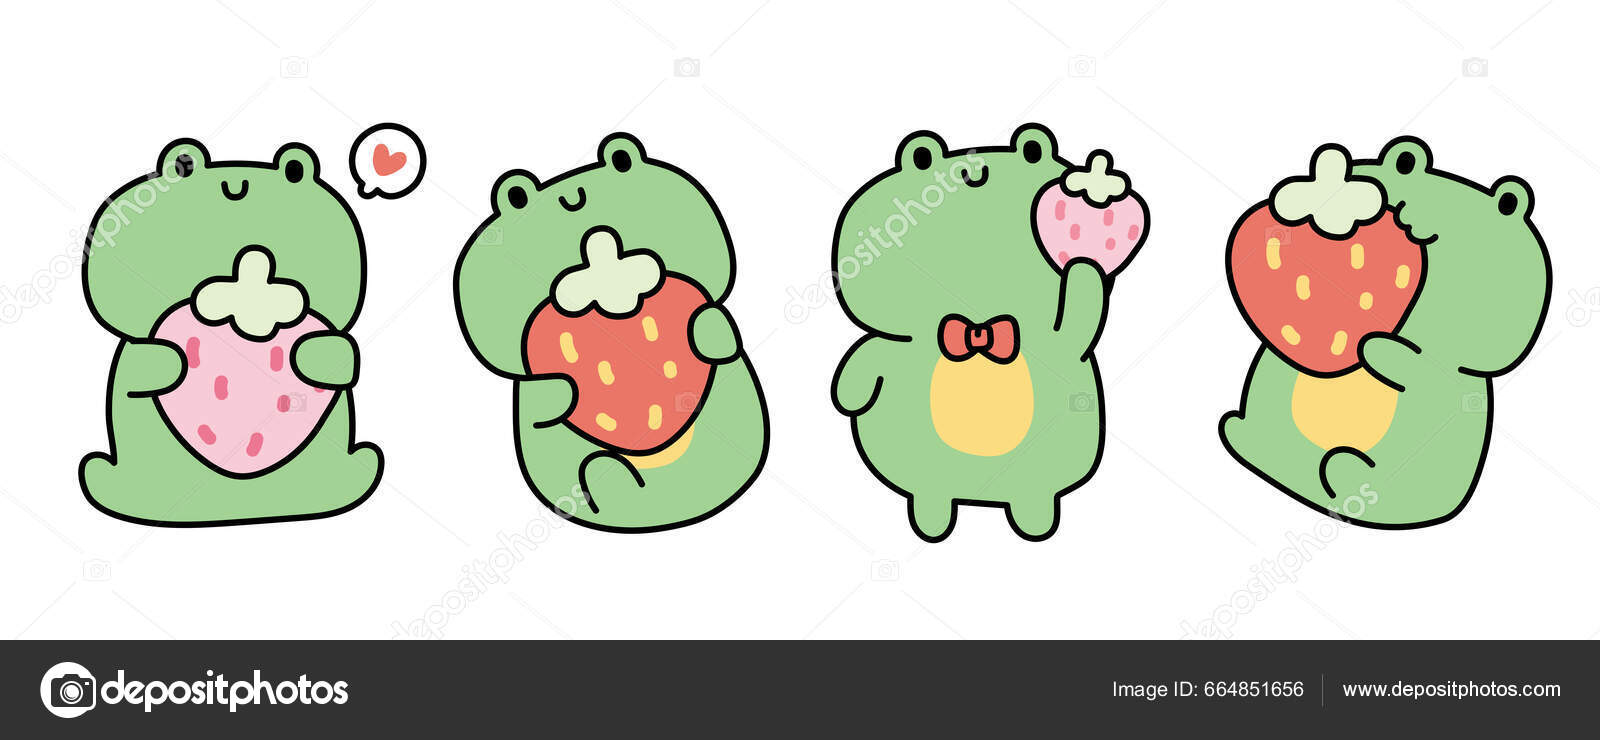 Cute Kawaii Frog with Flowers: Adorable Animal Illustration | Sticker